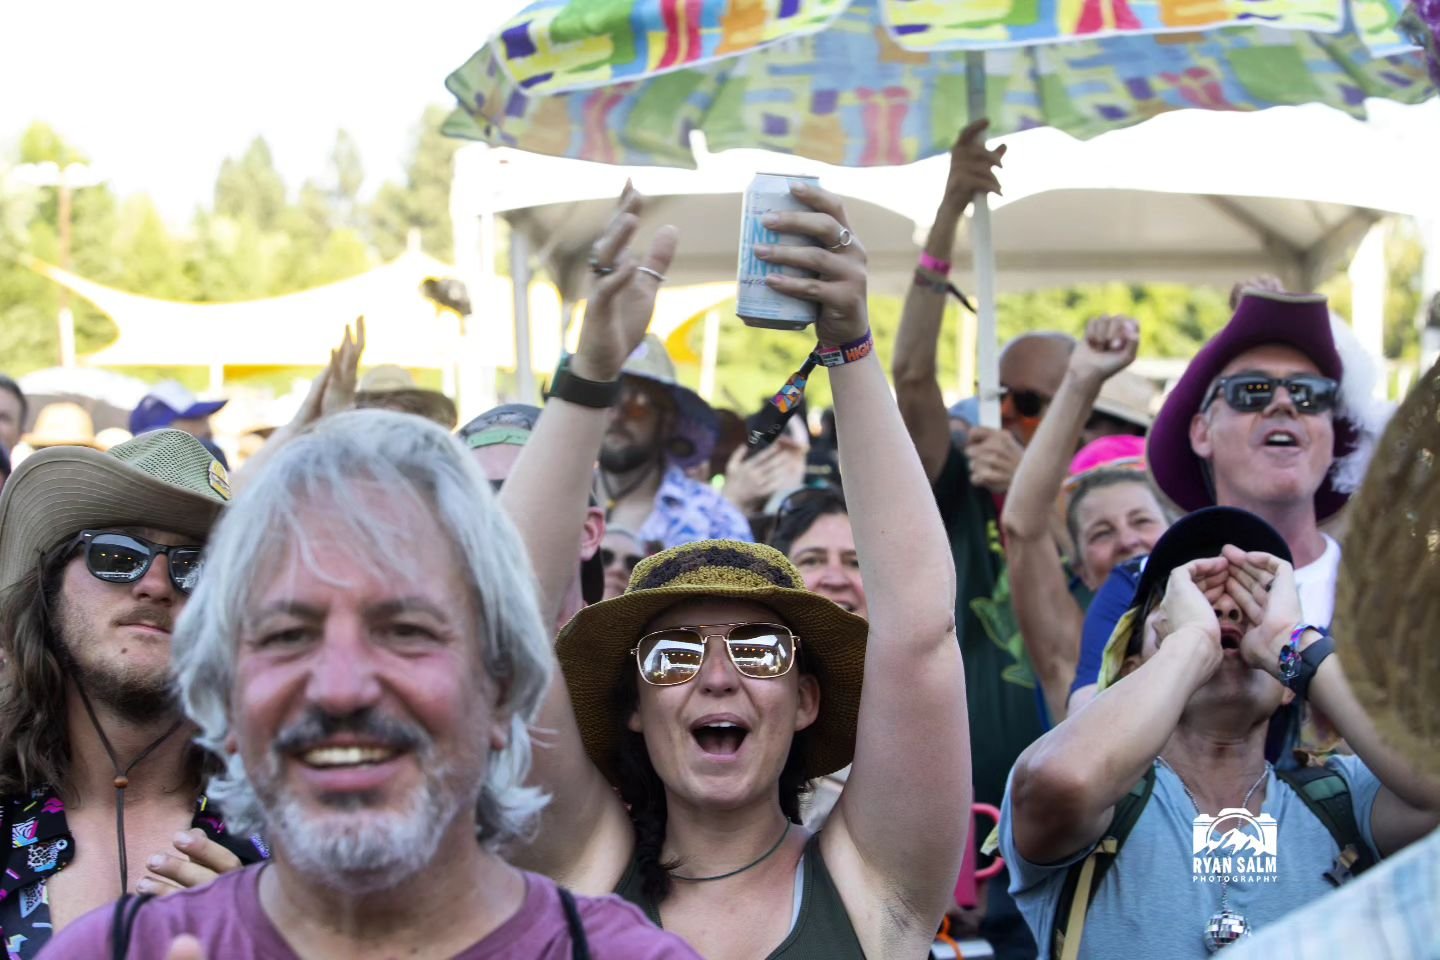 Want to come to #HighSierraMusicFestival this year, but your budget is tight? Join our Ambassador Program, spread the love to your family, friends, and social network, and earn a free pass. All you have to do is:

Sign up (takes 30 seconds)&nbsp;

Ge